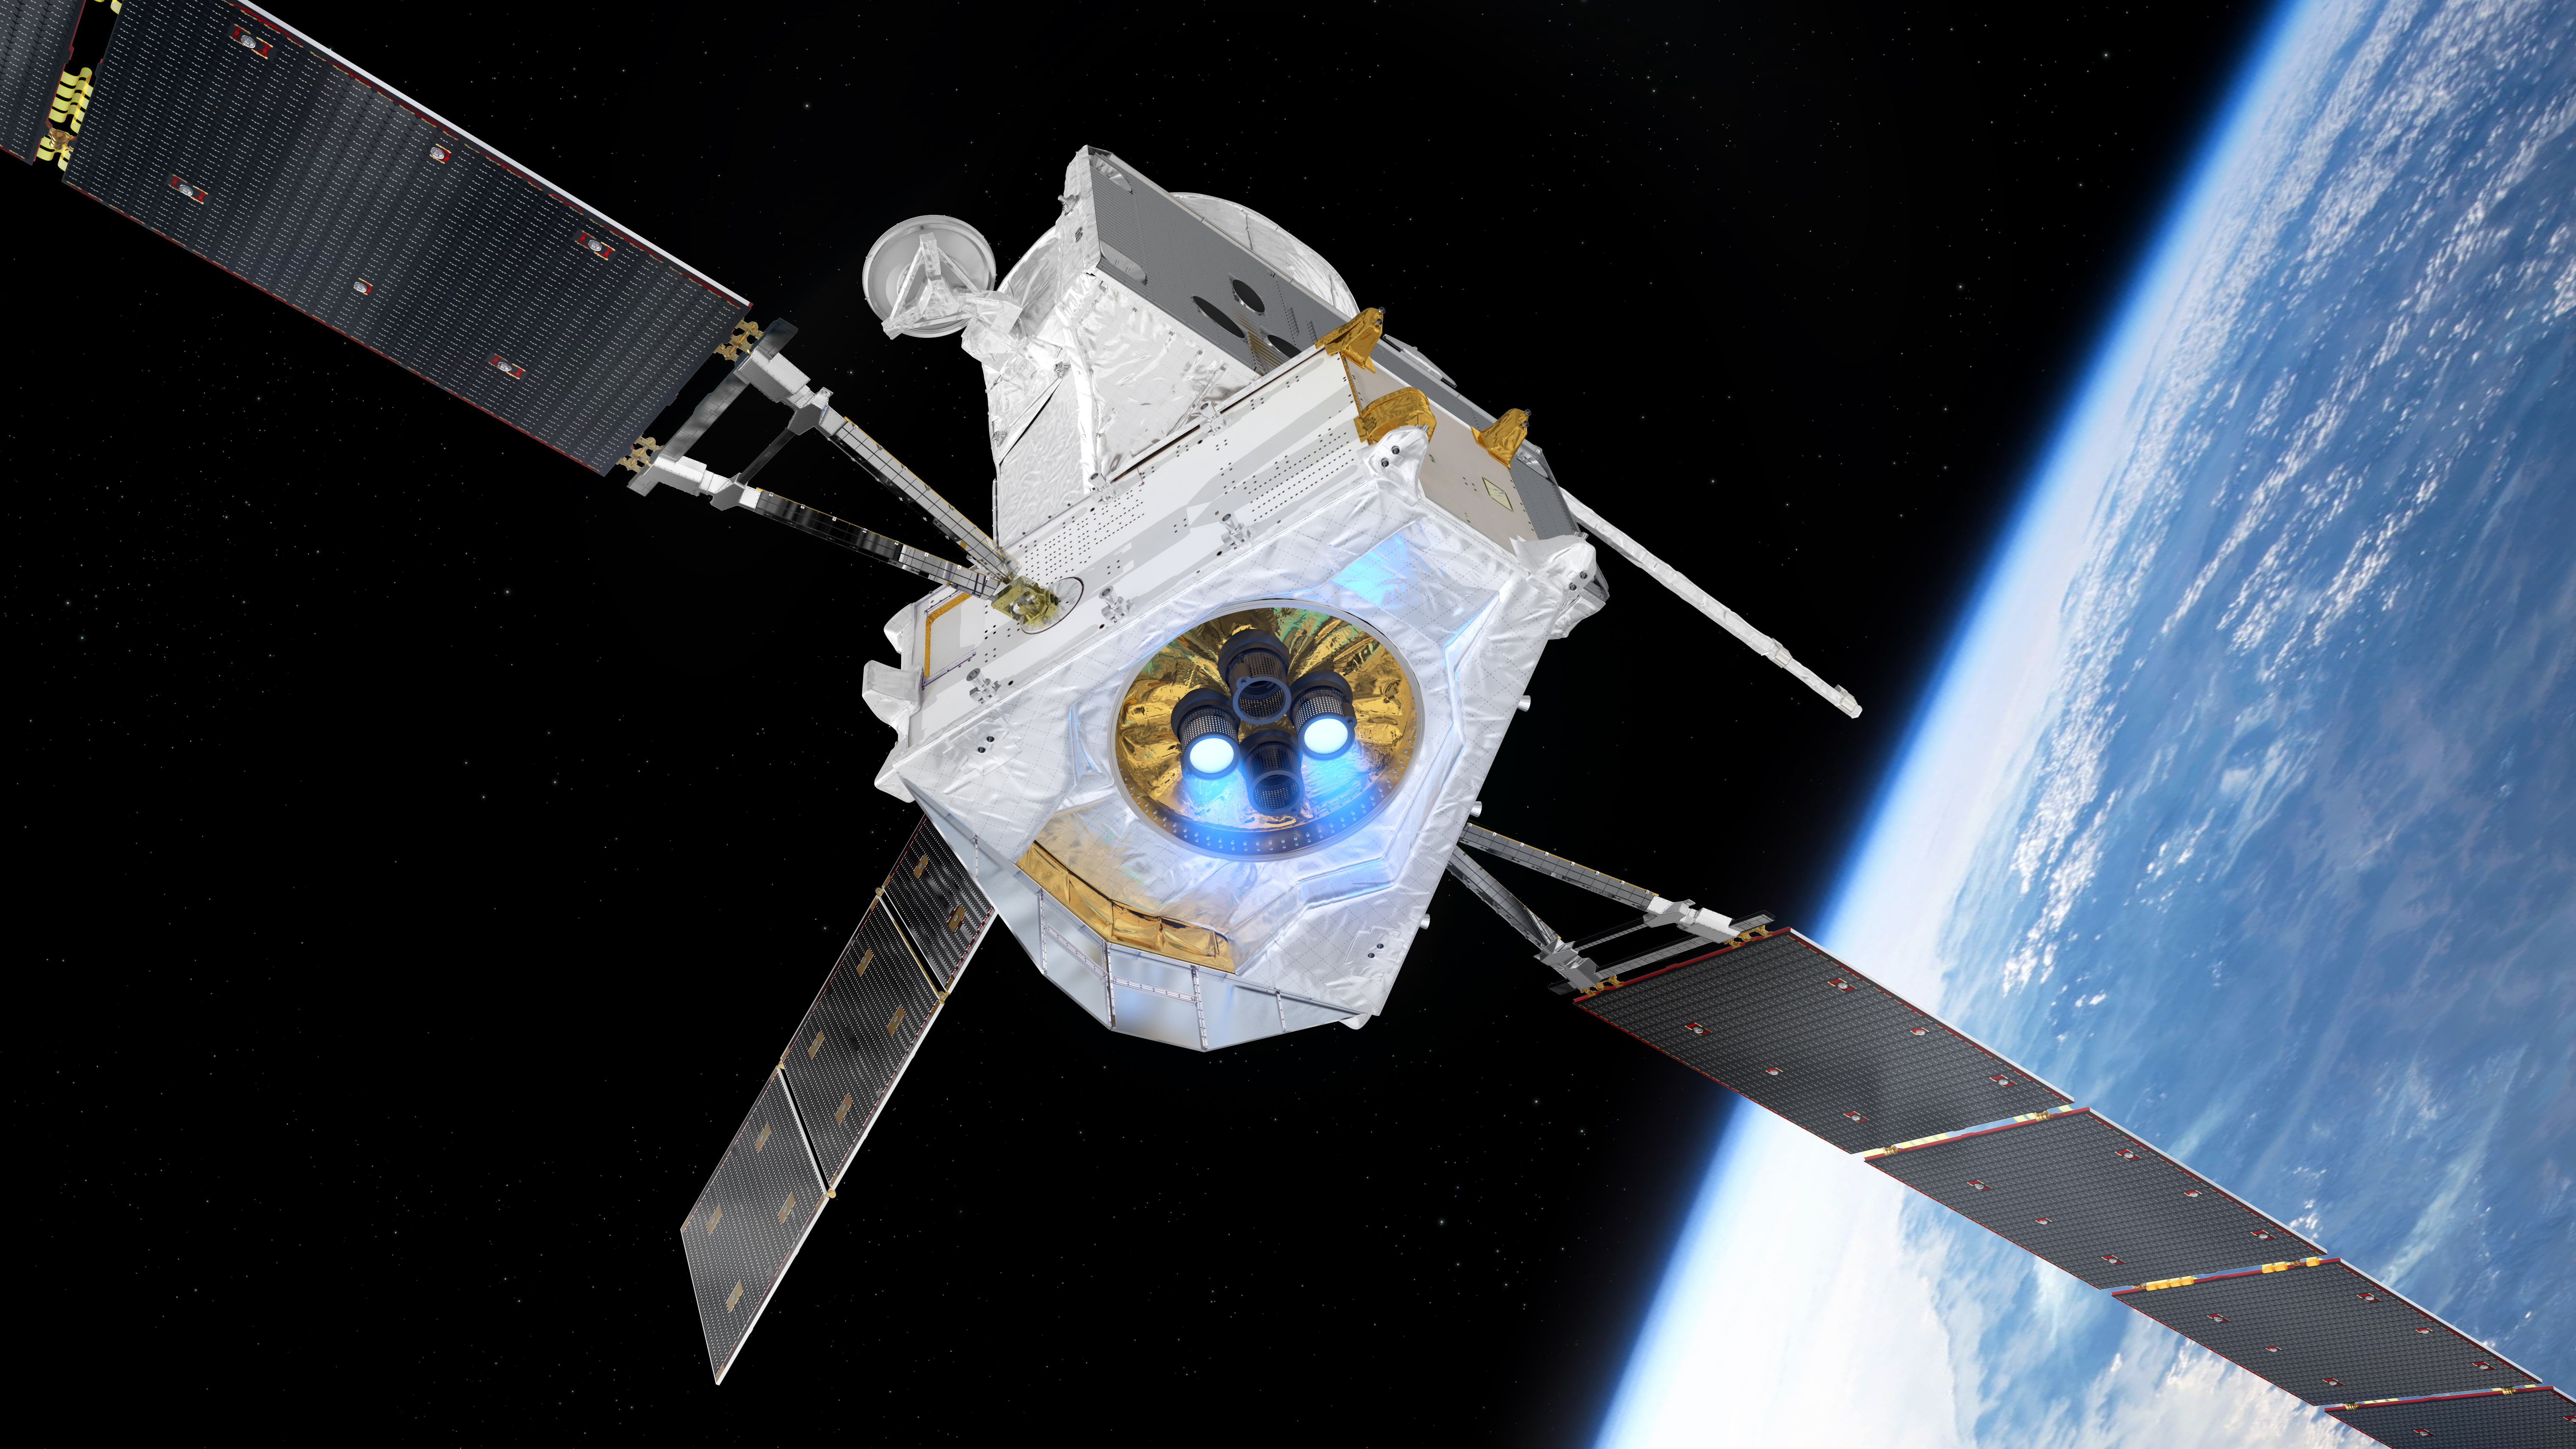 Artist’s impression of the BepiColombo spacecraft in cruise configuration, flying past Earth. The Mercury Transfer Module is shown with two ion thrusters firing